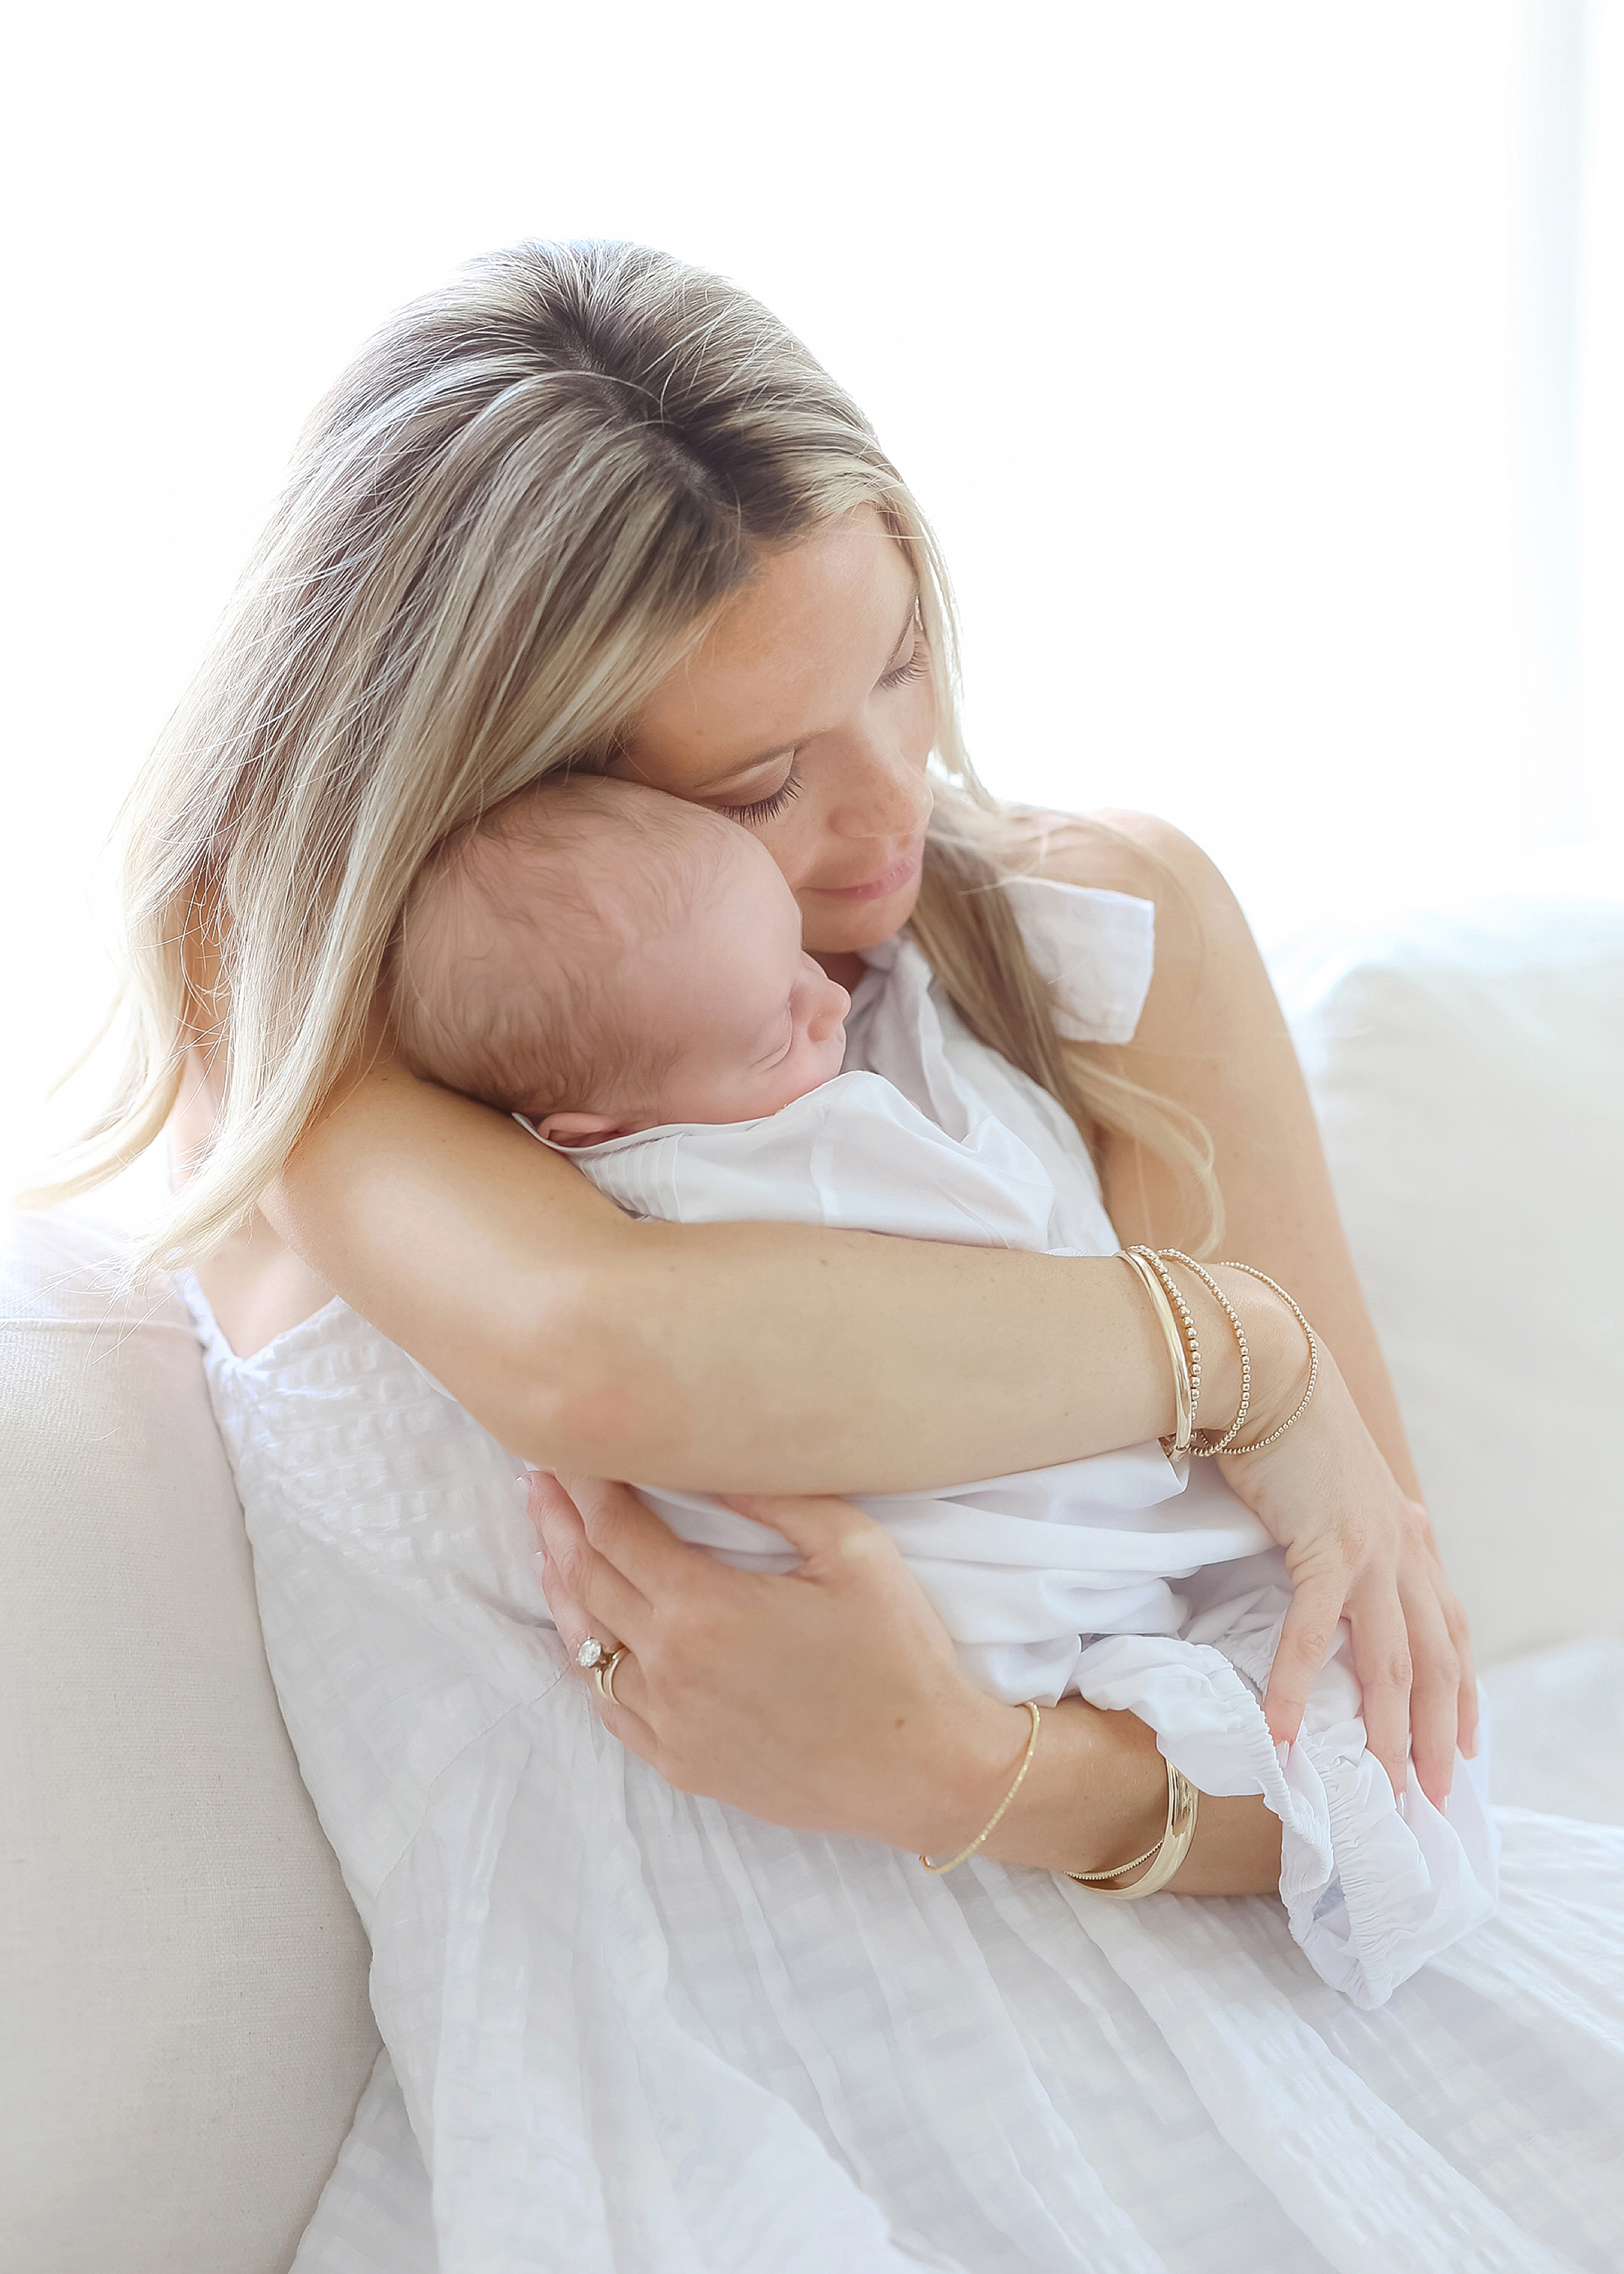 Light and airy at home newborn portrait of woman holding newborn baby boy dressed in white.